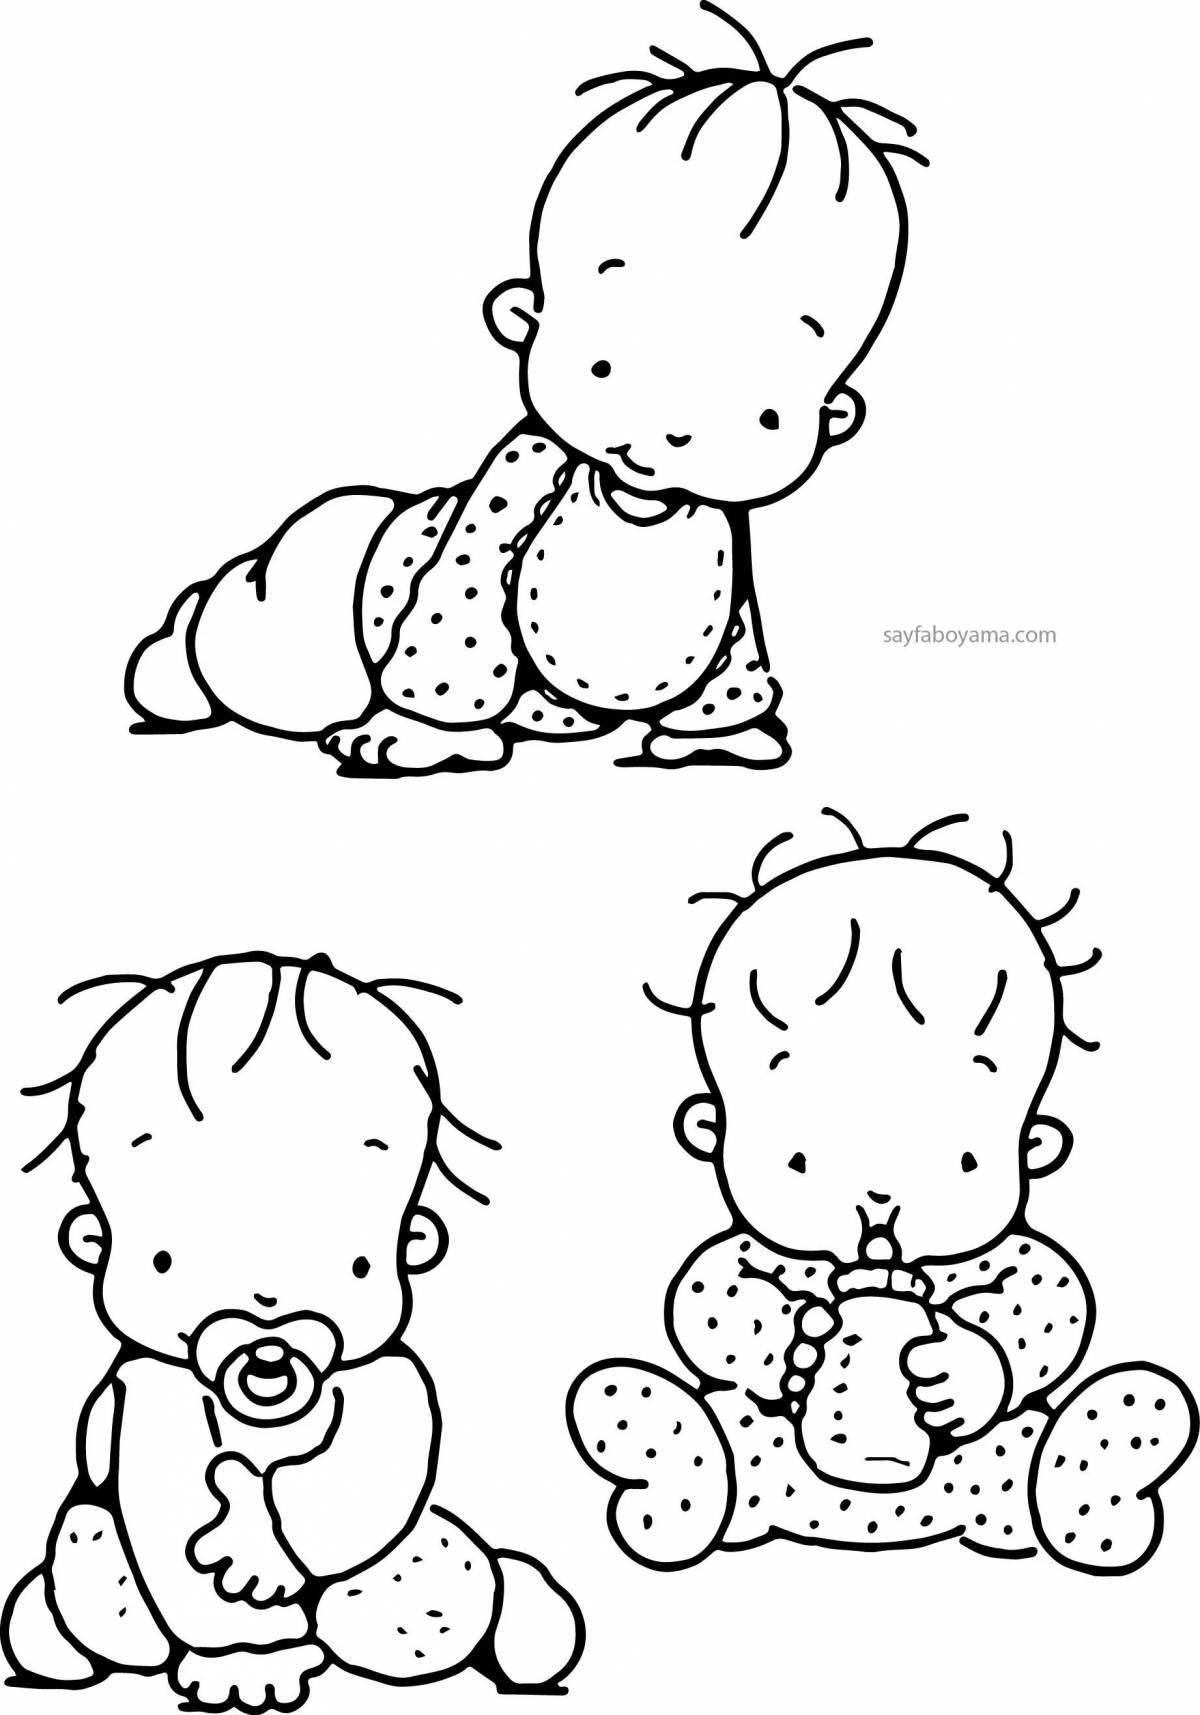 Children's coloring by content